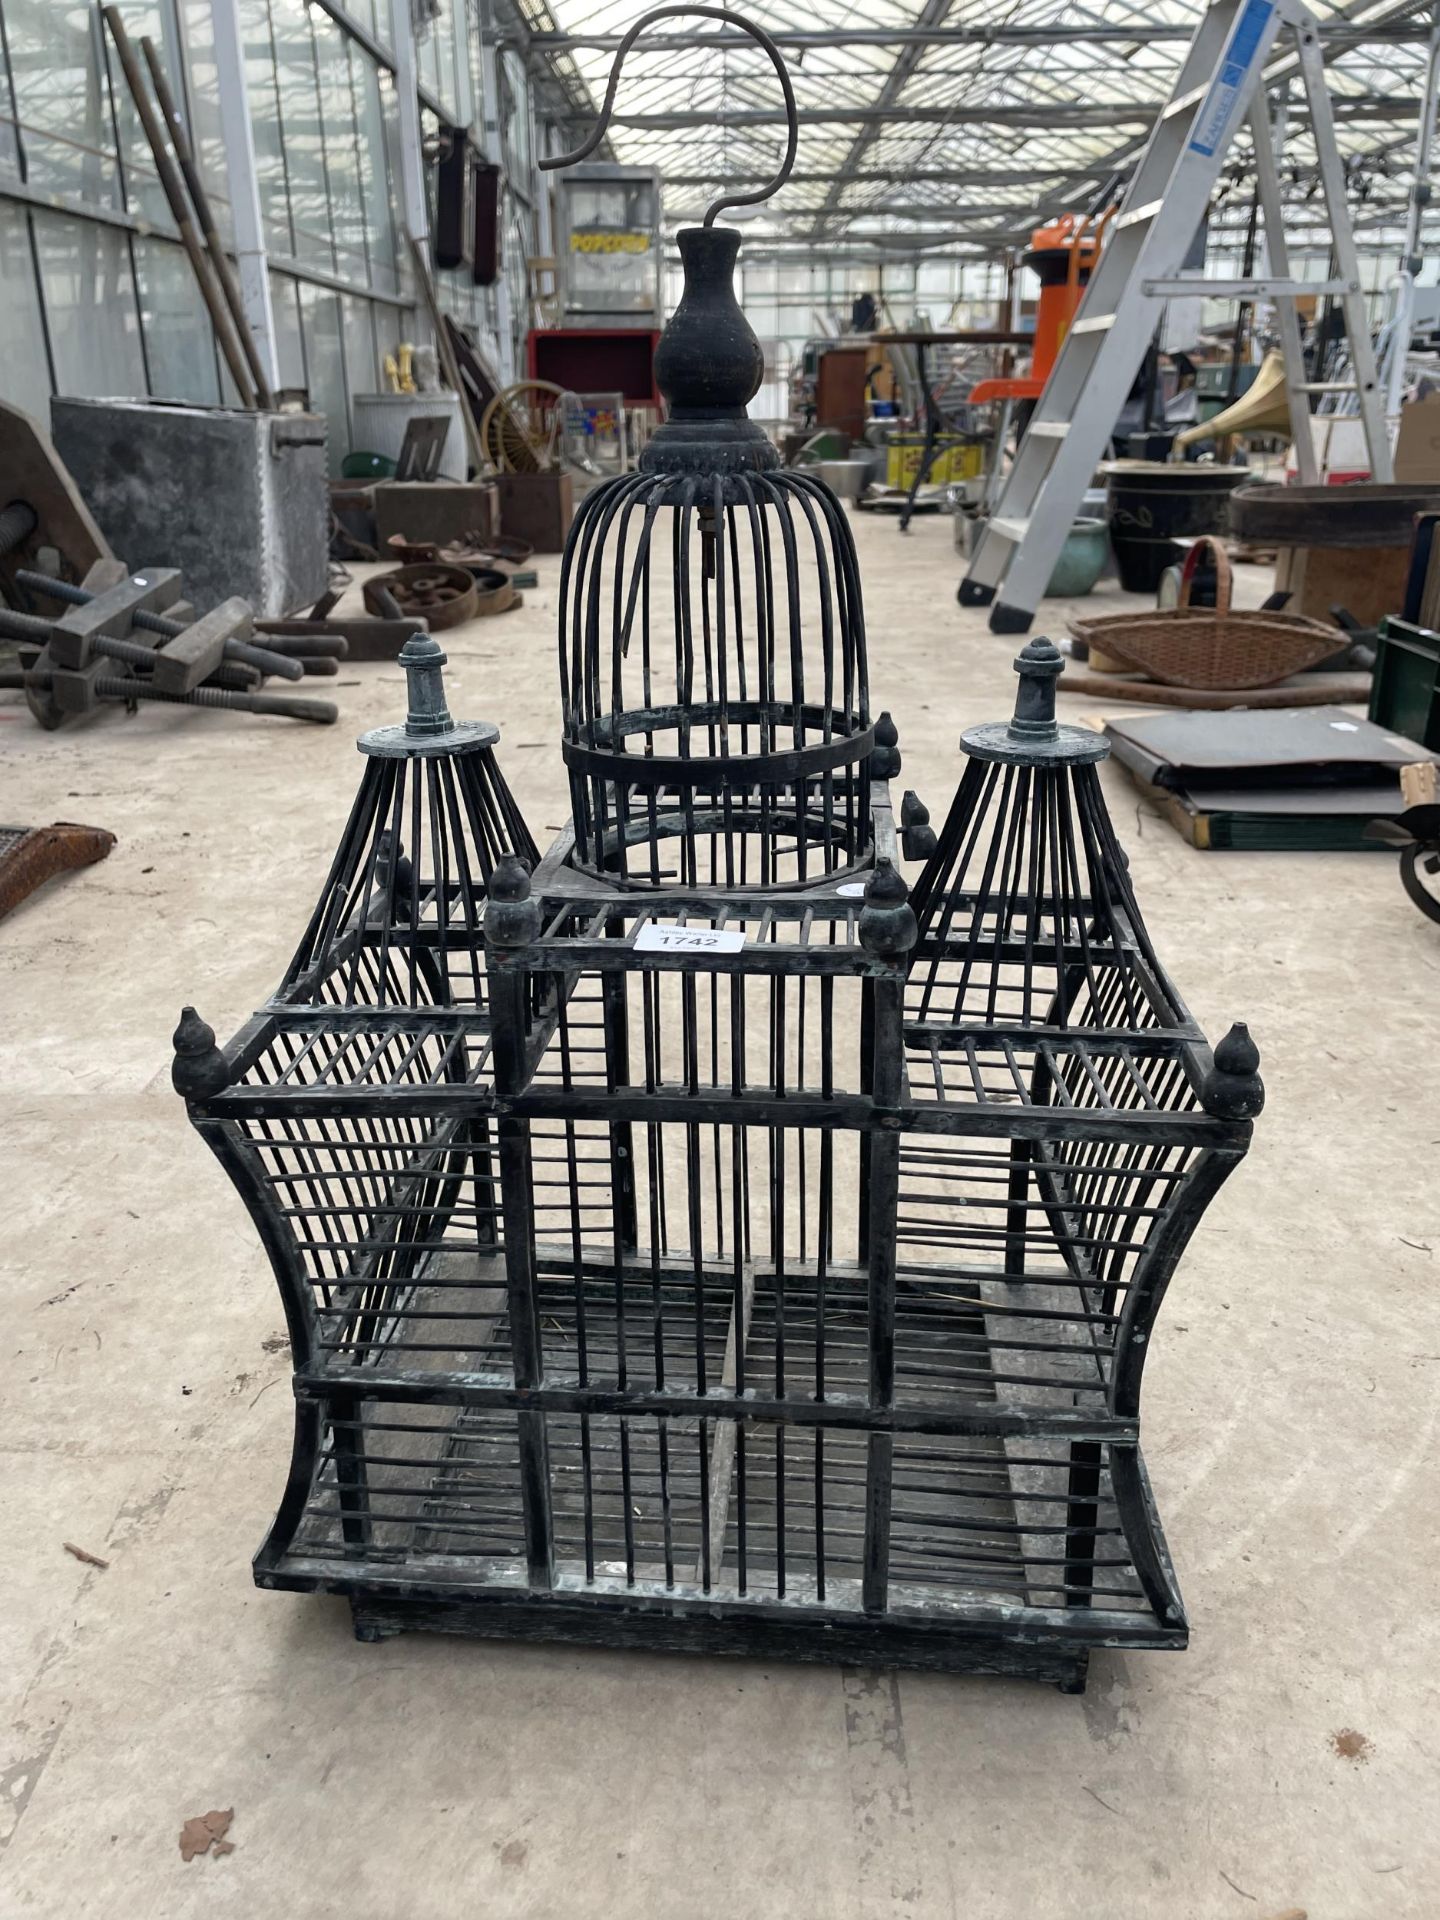 A VINTAGE STYLE DECORATIVE METAL BIRD CAGE - Image 2 of 2